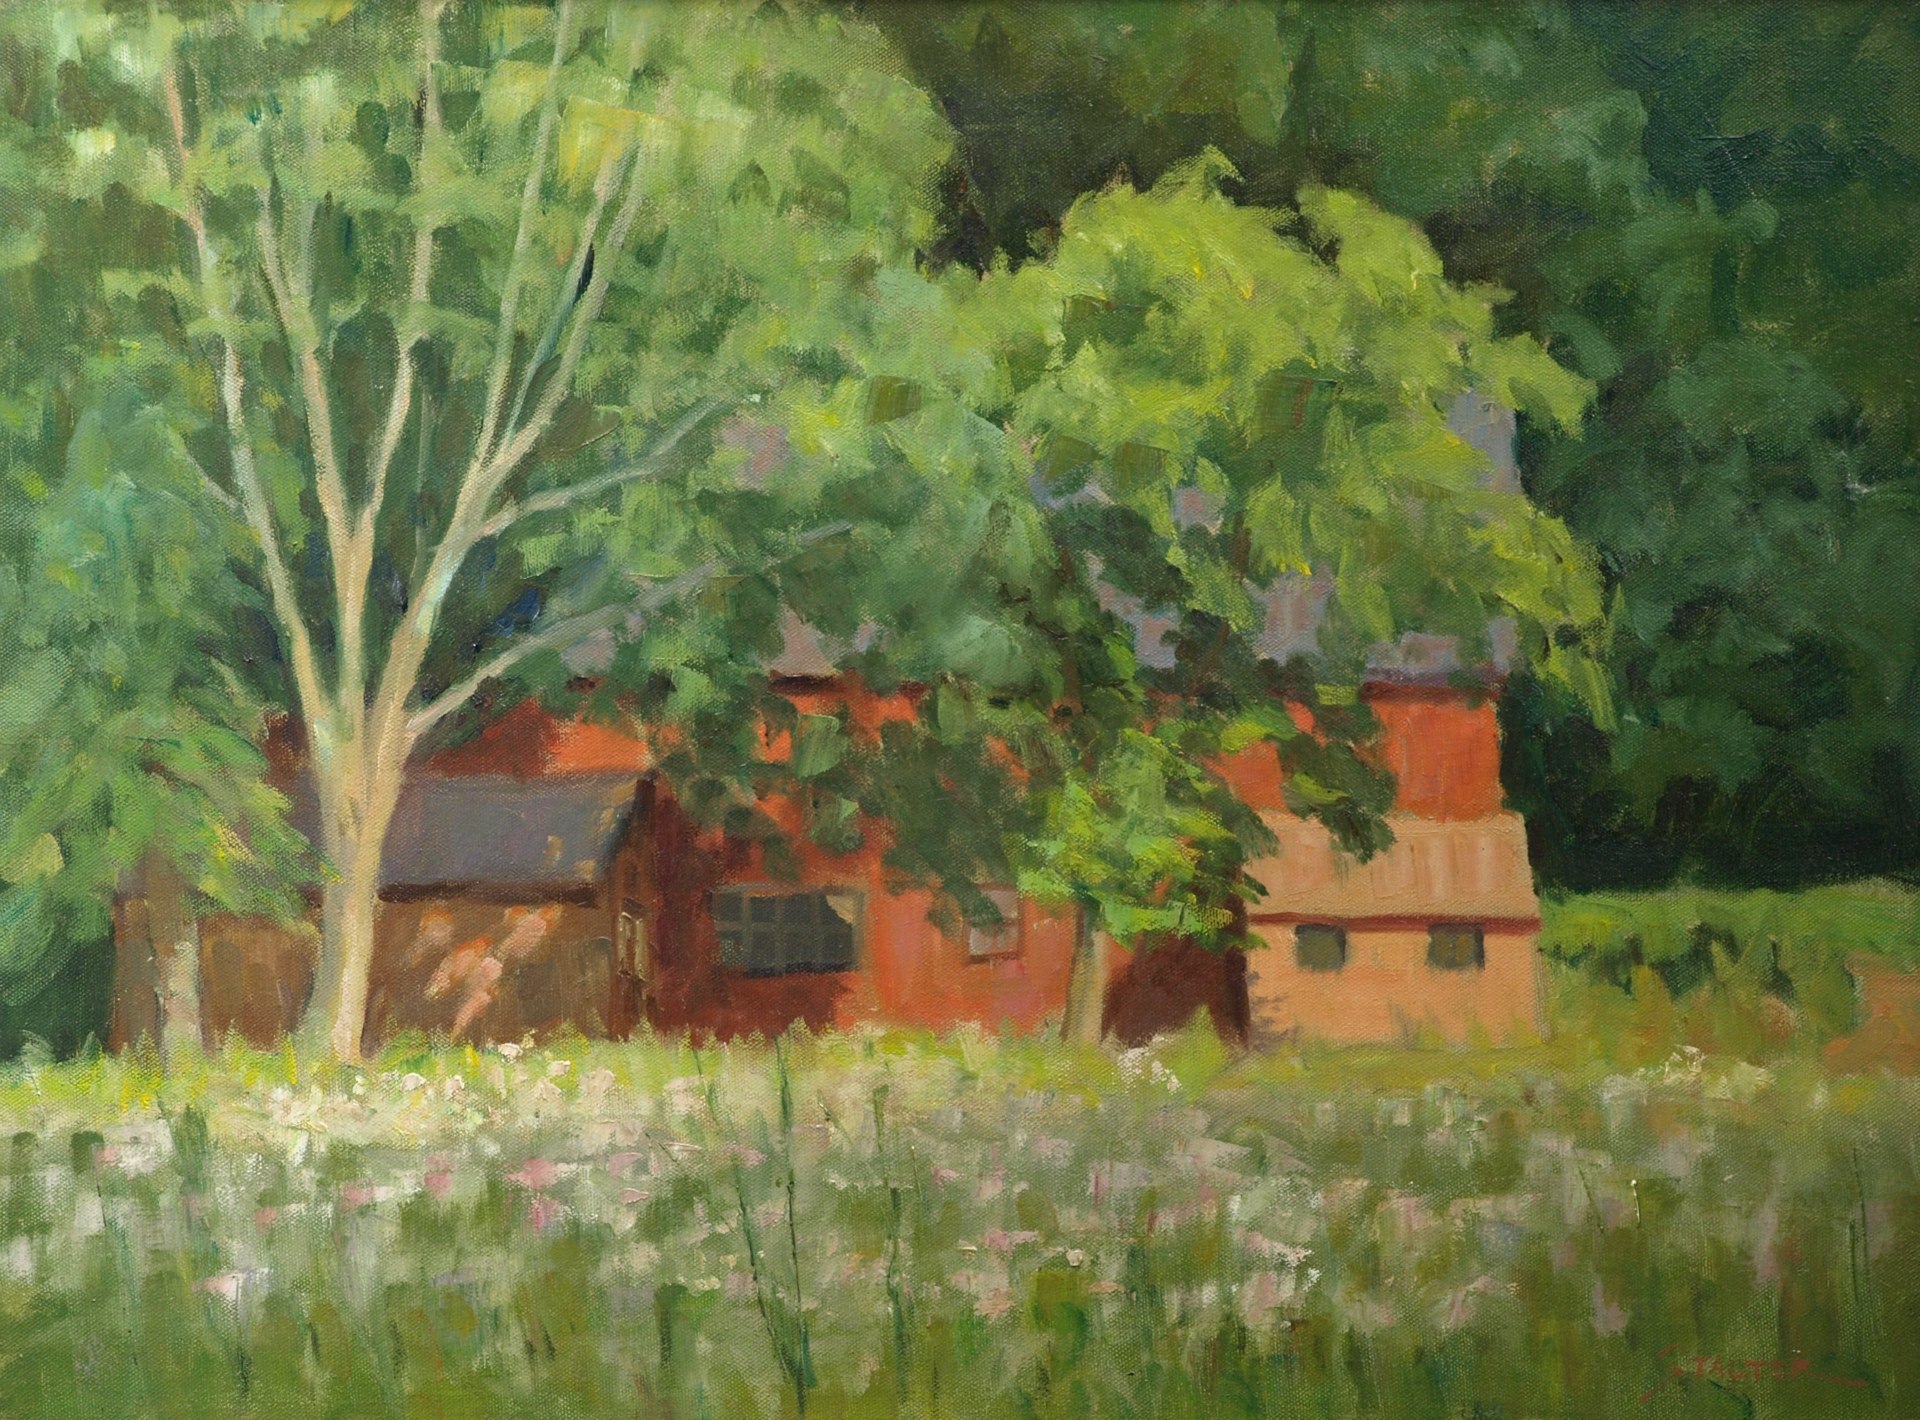 Kent Land Trust, Oil on Canvas, 18 x 24 Inches, by Richard Stalter, $650